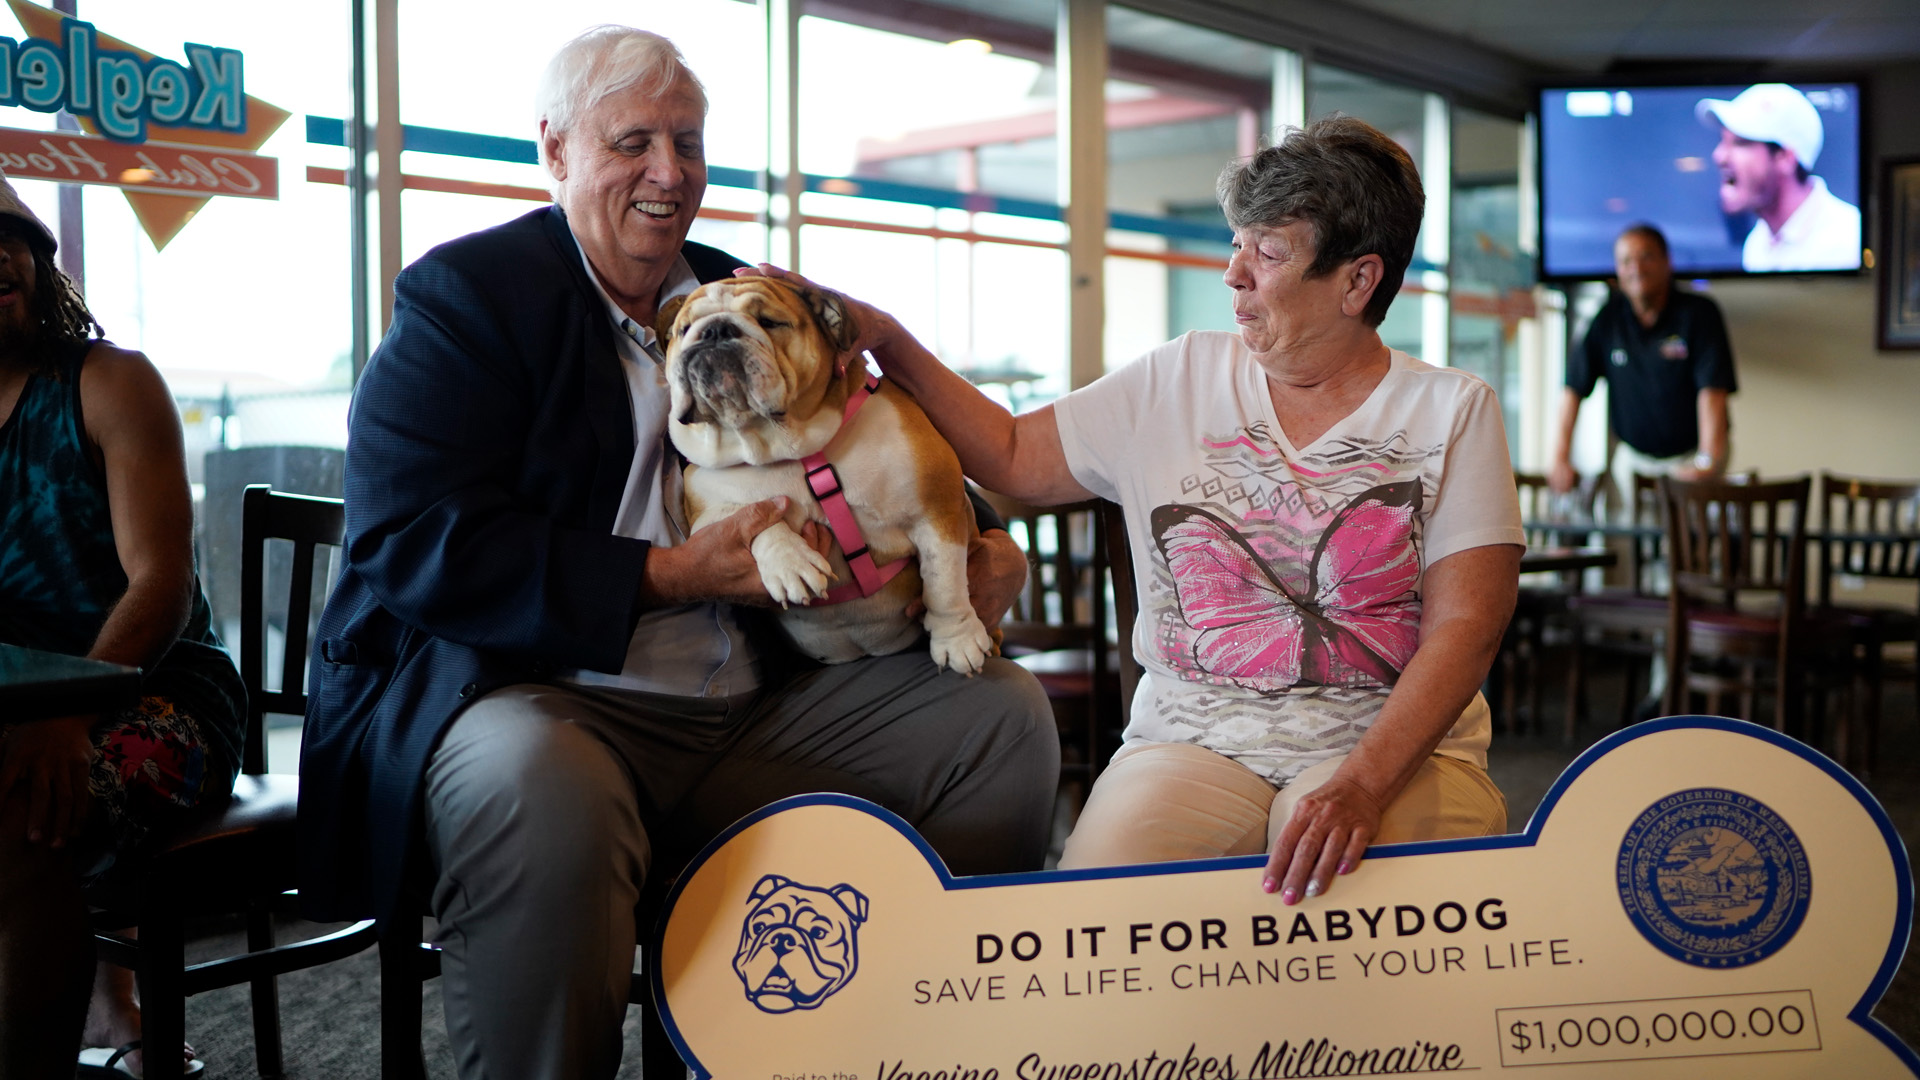 MILLION-DOLLAR WINNER: Gov. Justice surprises Morgantown woman with $1 million check through “Do it for Babydog” Vaccination Sweepstakes - Governor Jim Justice